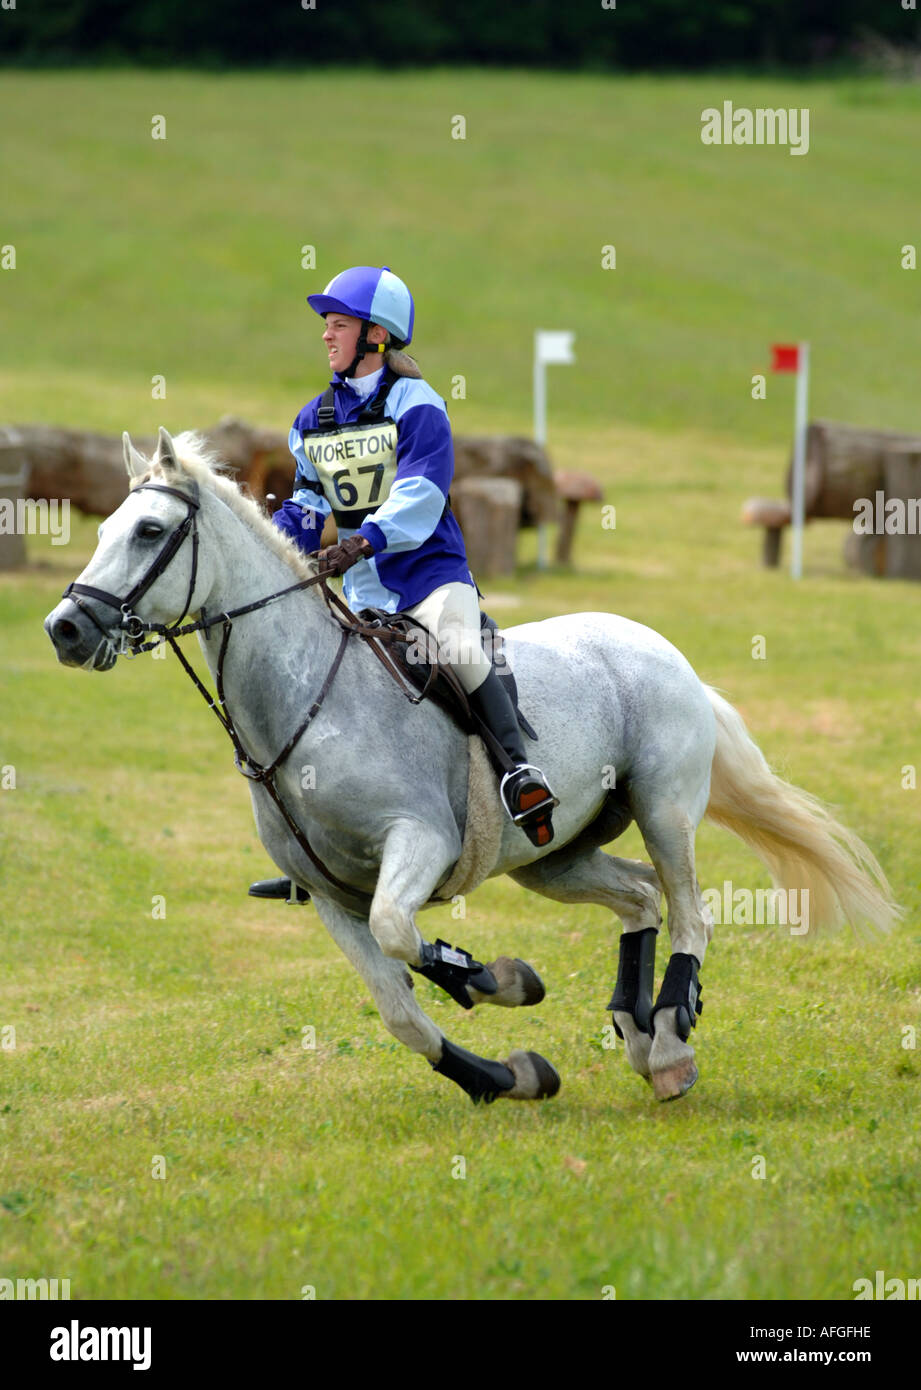 Horse and rider at full gallop during a one day eventing competition at Moreton in Dorset Britain UK Stock Photo